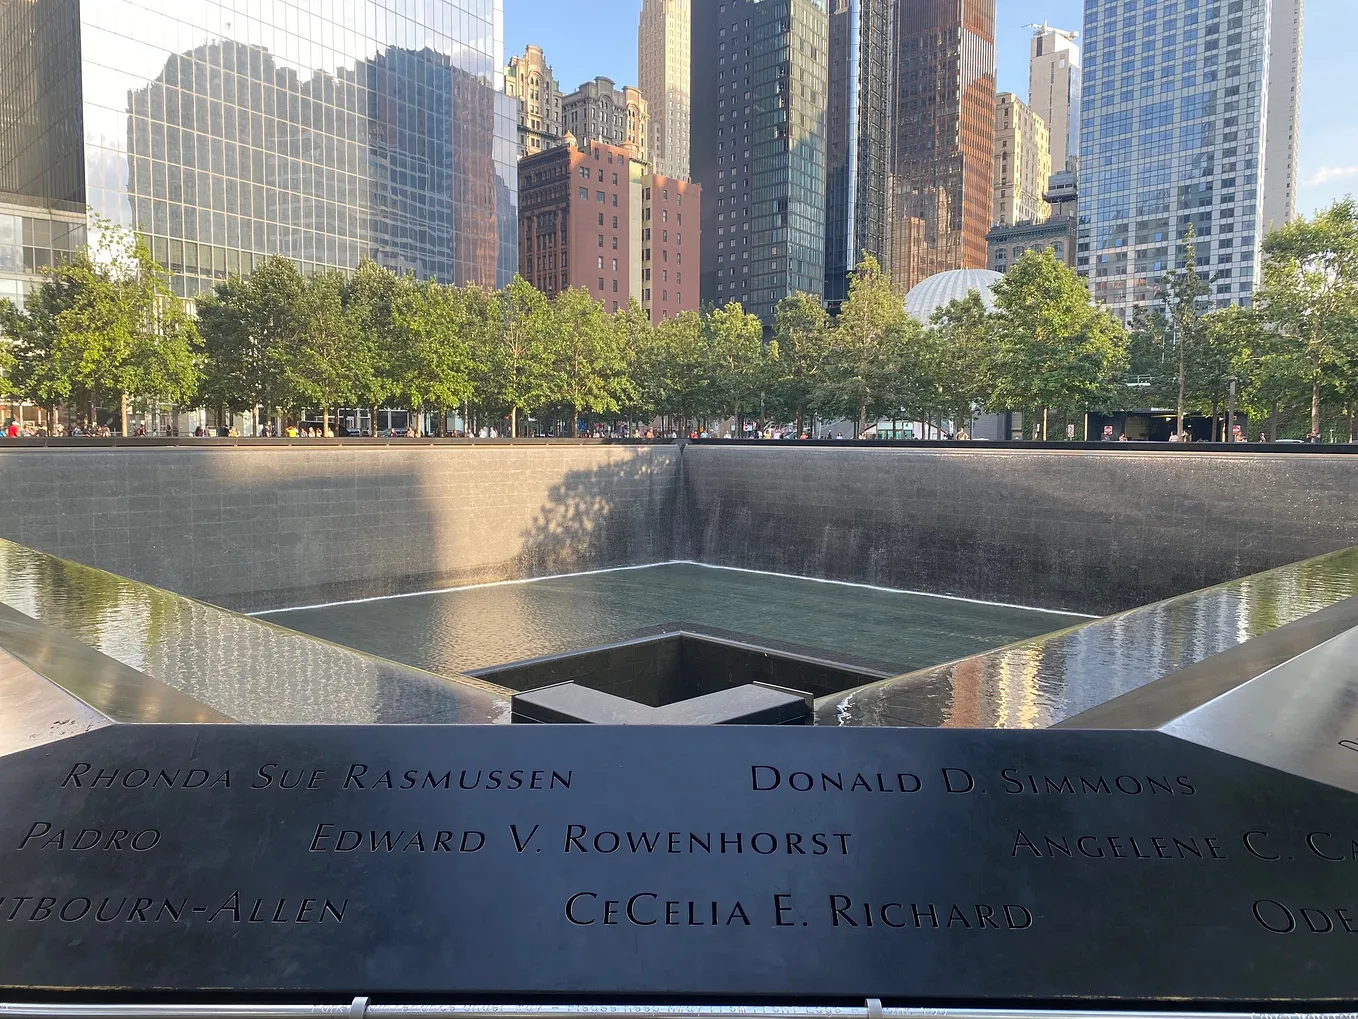 A view of the 9/11 Memorial